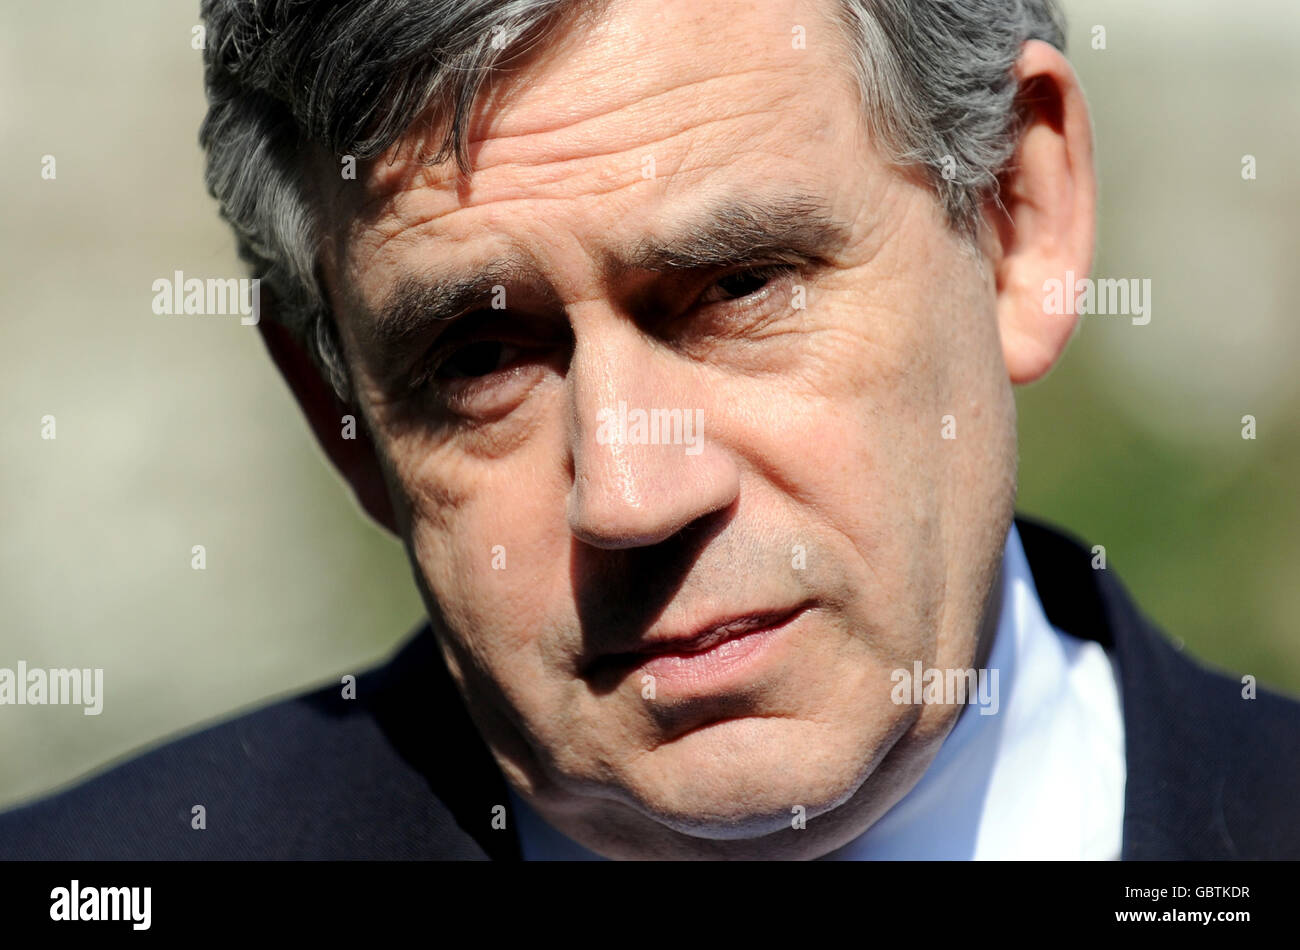 Prime Minister Gordon Brown in the garden of 10 Downing Street, London, as he meets members of the Maternal Mortality Campaign. Stock Photo